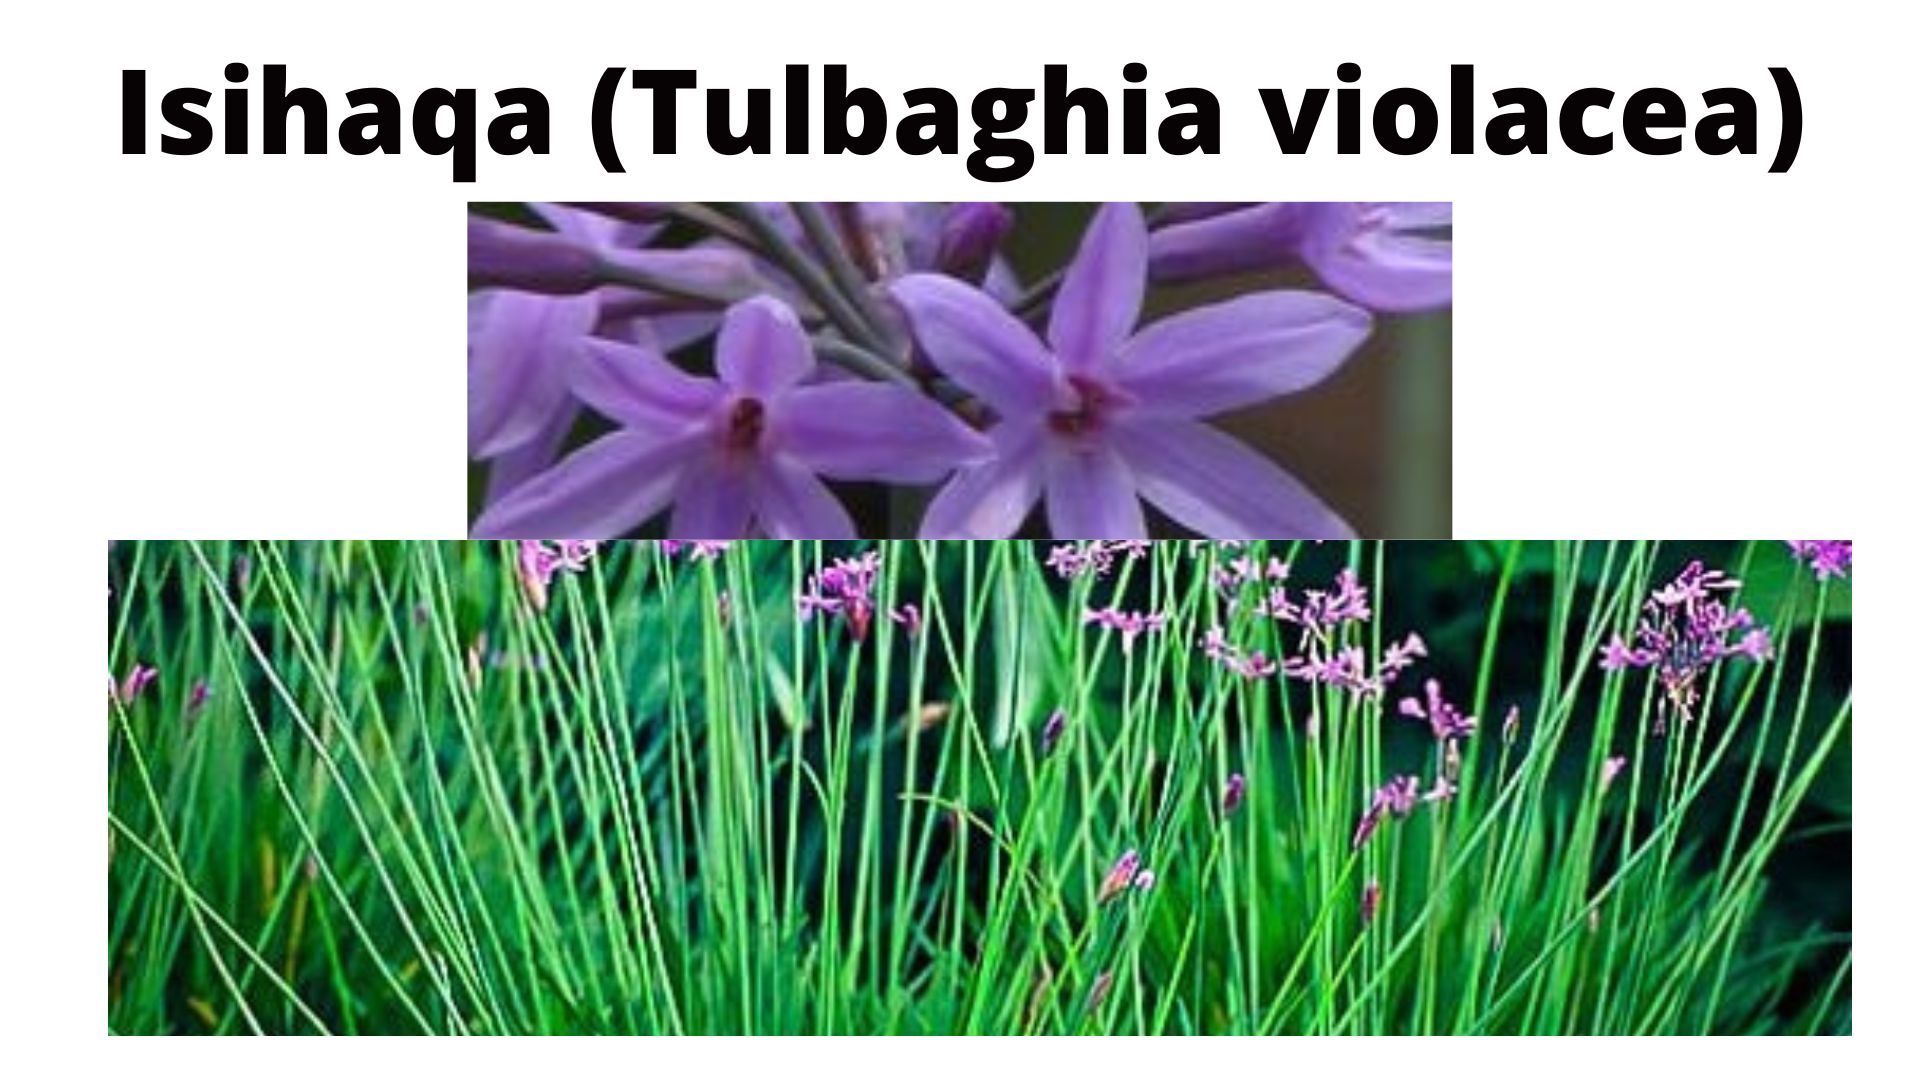 You are currently viewing Tulbaghia violacea (Isihaqa)